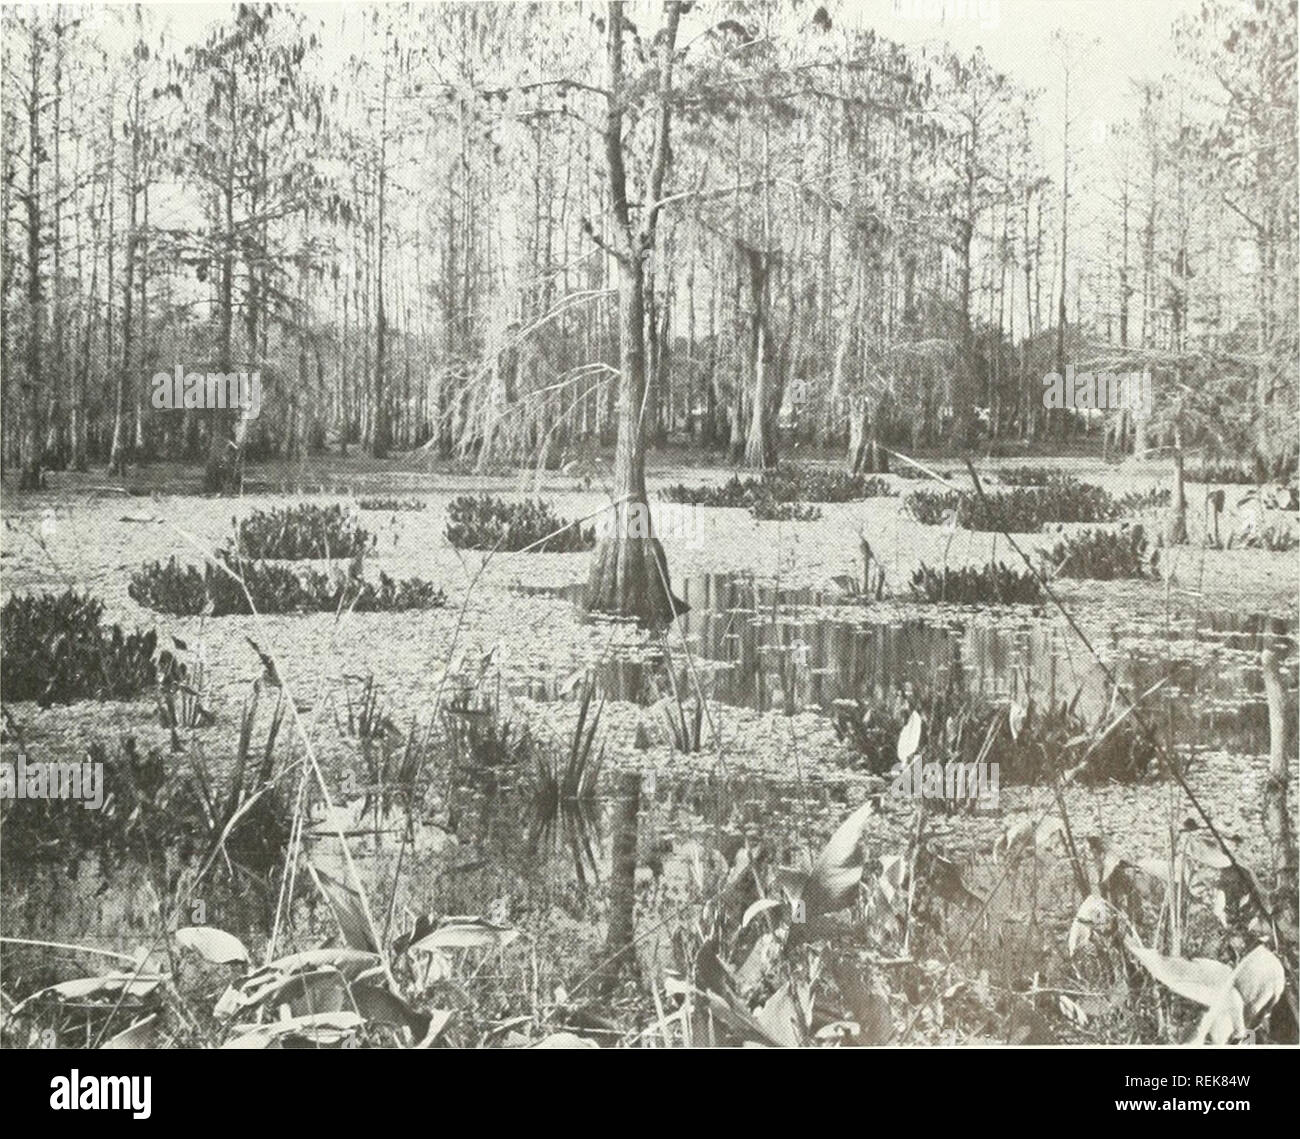 . Classification of wetlands and deepwater habitats of the United States. Wetlands -- United States; Wetland ecology -- United States; Aquatic ecology -- United States. 101. Plate 54.—Classification: system Palustrine, class Aquatic Bed (foreground). Forested Wetland (background), subclass Floating (foreground) and Needle-leaved Deciduous (background), water regime Permanently Flooded, water CHEMISTRY Fresh. The dominant plant in the foreground is water lettuce (Pistia stratiotes) and in the background bald cypress (Taxodium distichum). The subordinate species is arrowhead {Sagittaria spp.). ( Stock Photo